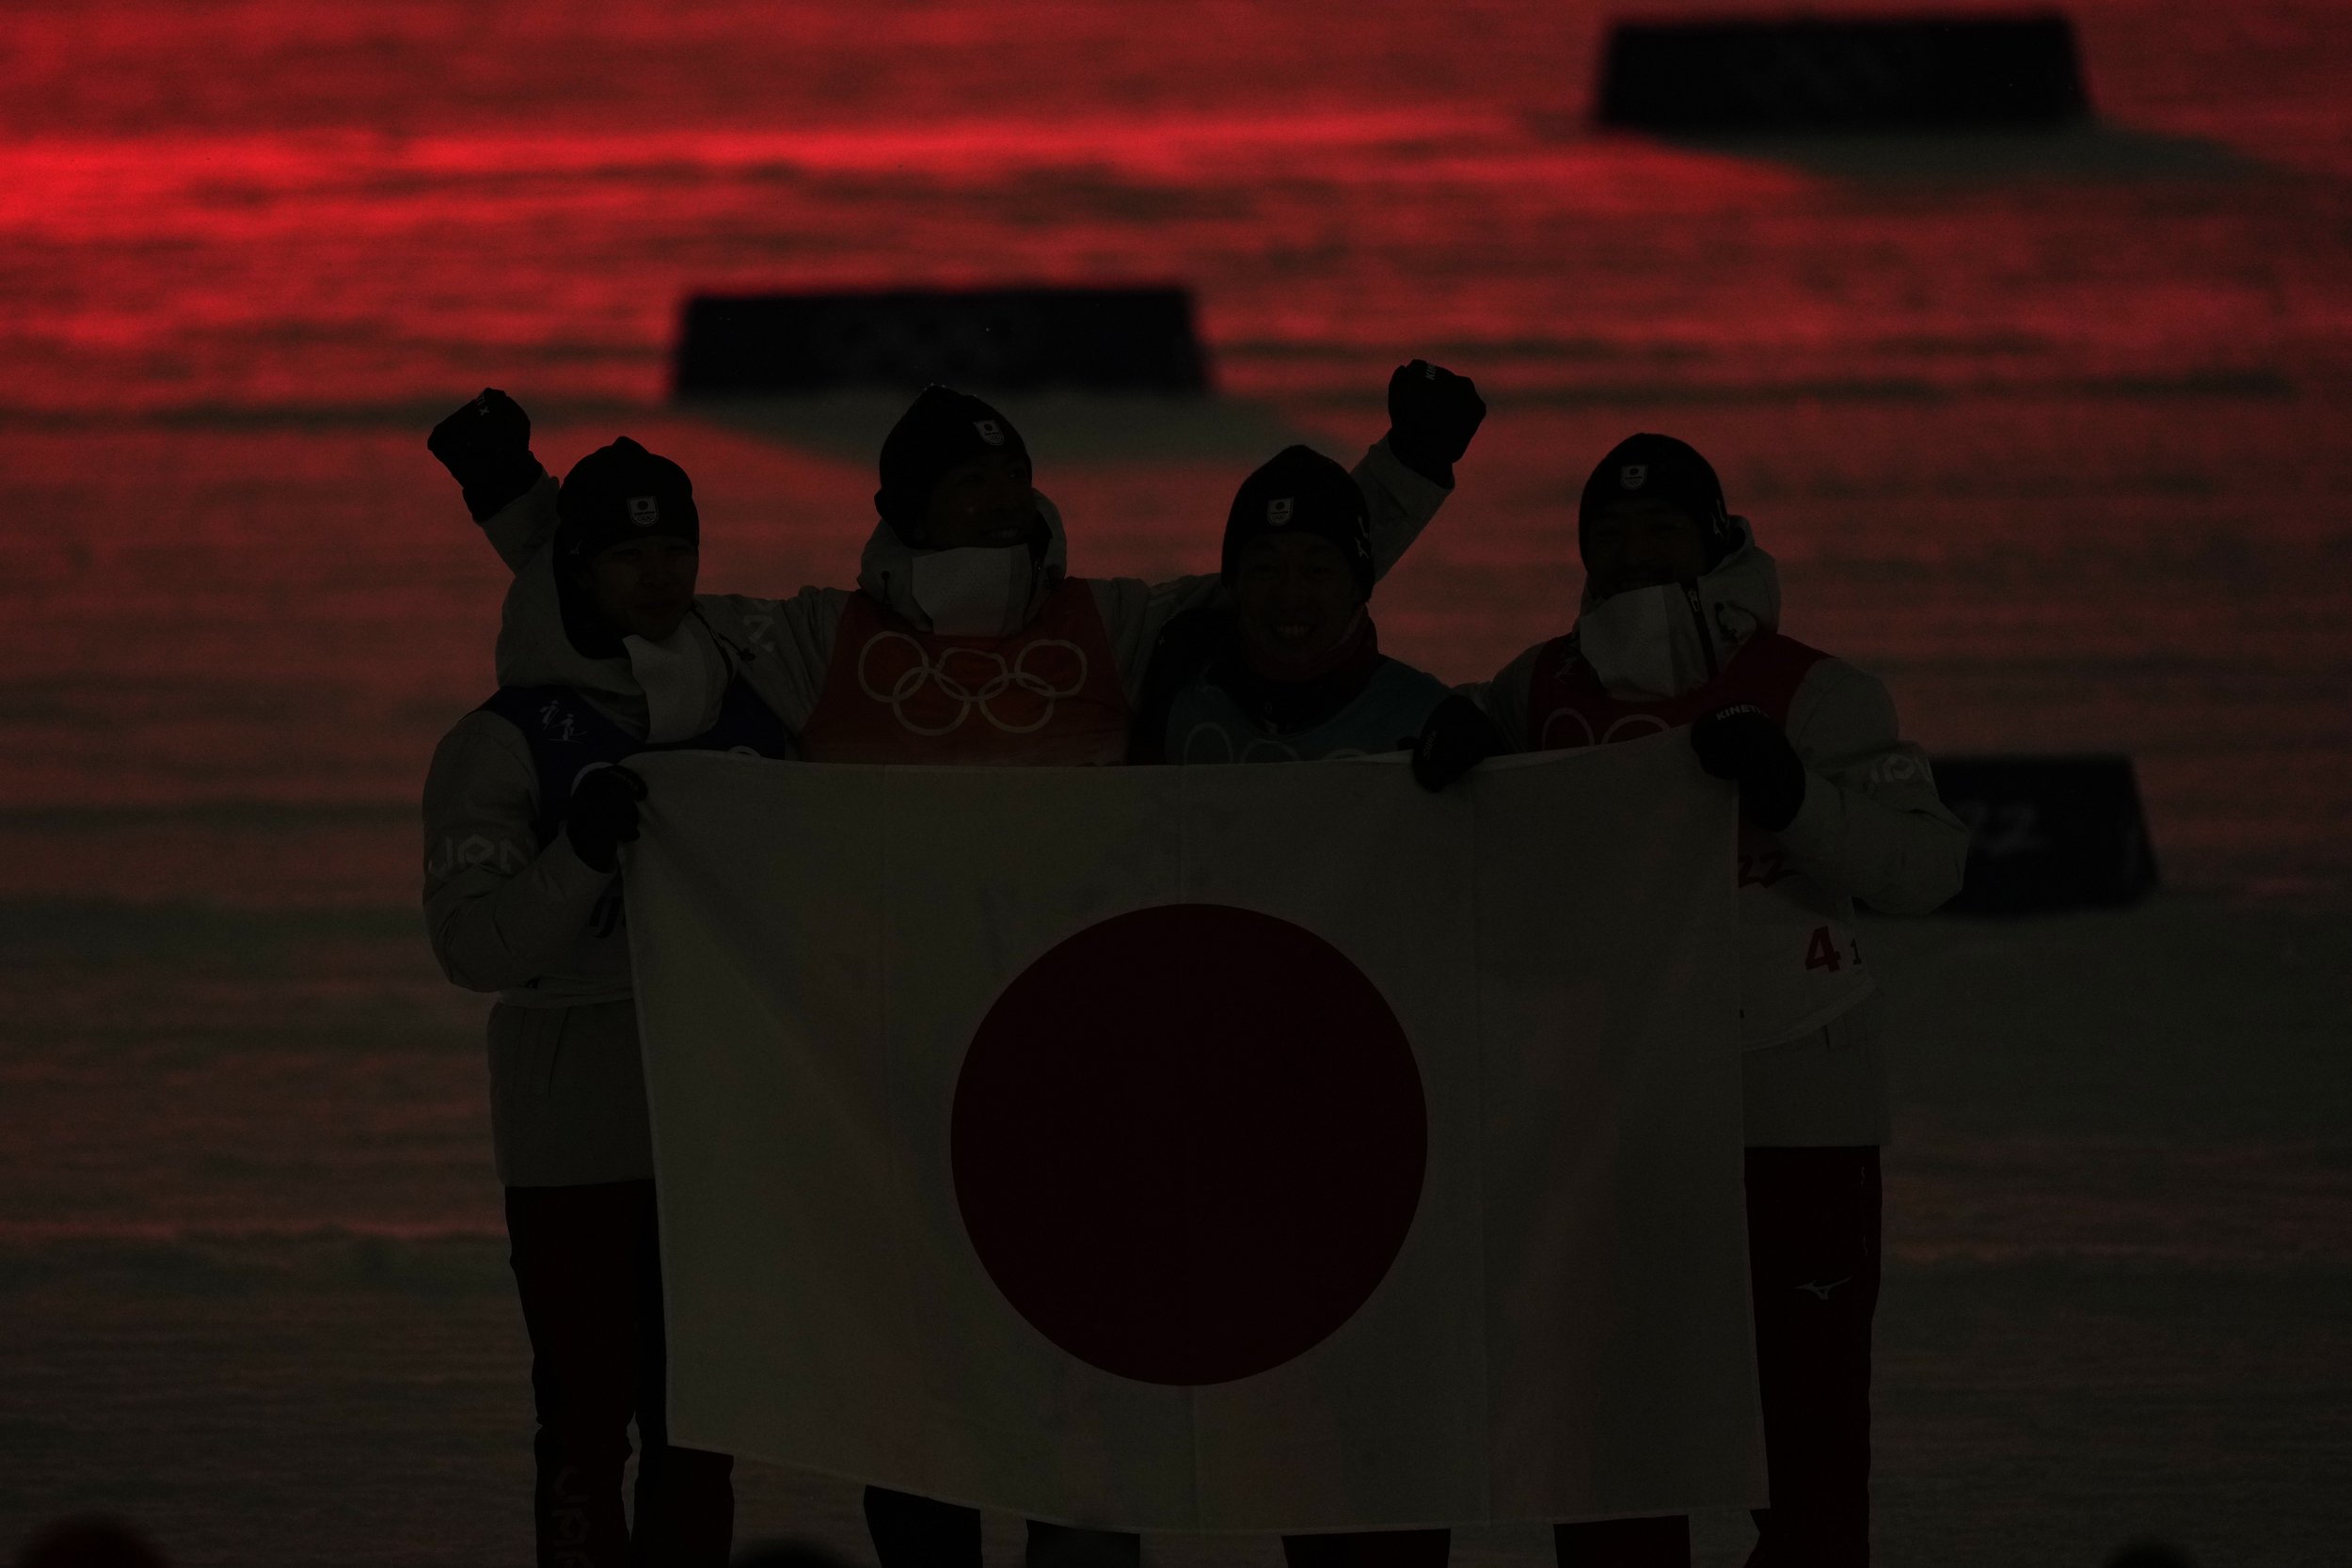  Bronze medal finishers Japan pose after a venue ceremony after the cross-country skiing competition of the team Gundersen large hill/4x5km at the 2022 Winter Olympics, Thursday, Feb. 17, 2022, in Zhangjiakou, China. (AP Photo/Alessandra Tarantino) 